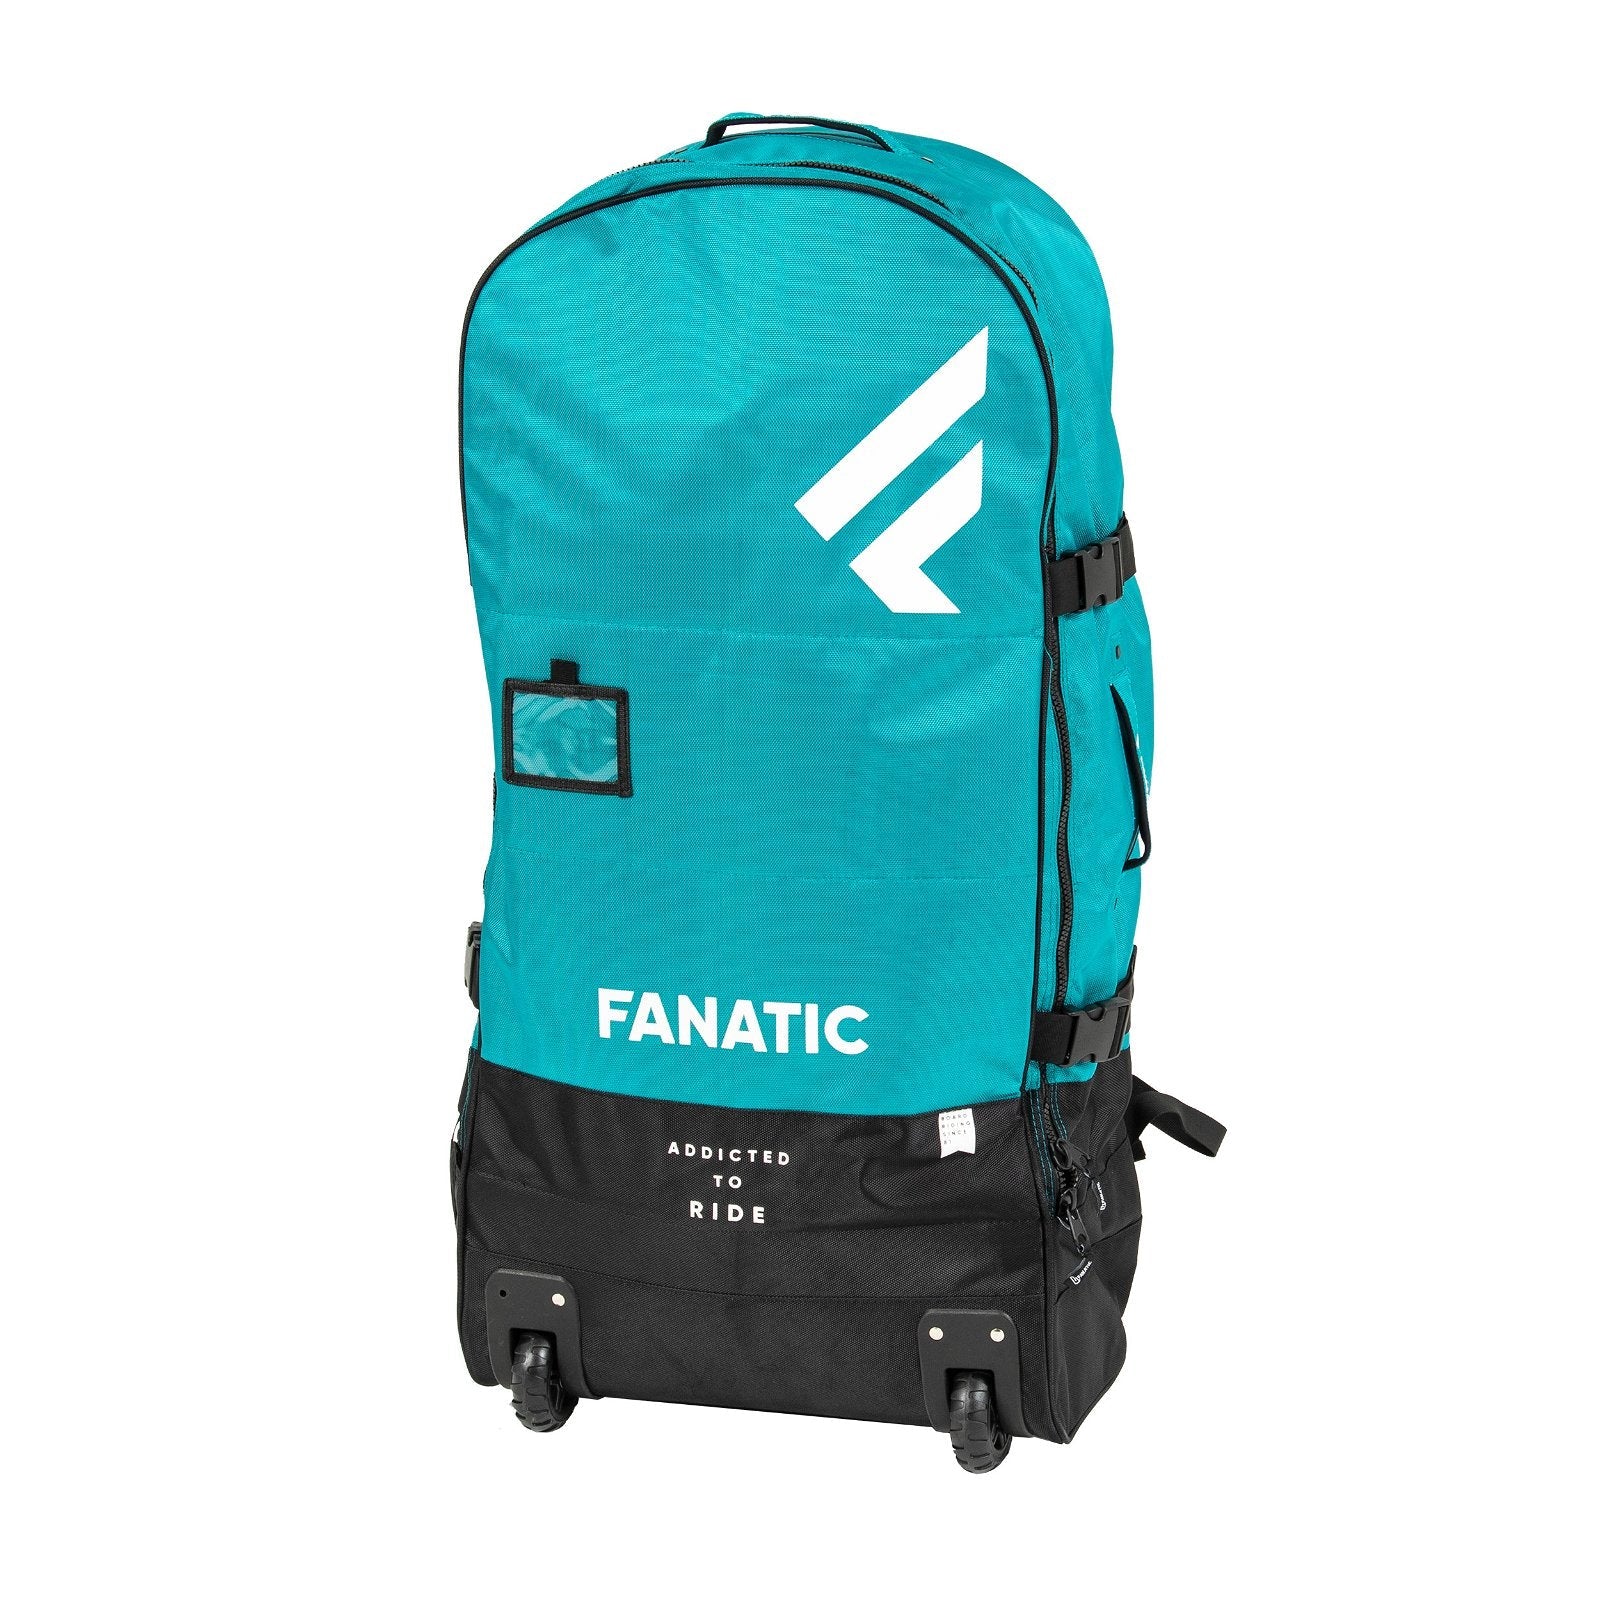 FANATIC Gearbag Fly Air Platform S 2024-Fanatic SUP-90x70x32cm-turquoise-13200-7007-9008415934003-Surf-store.com